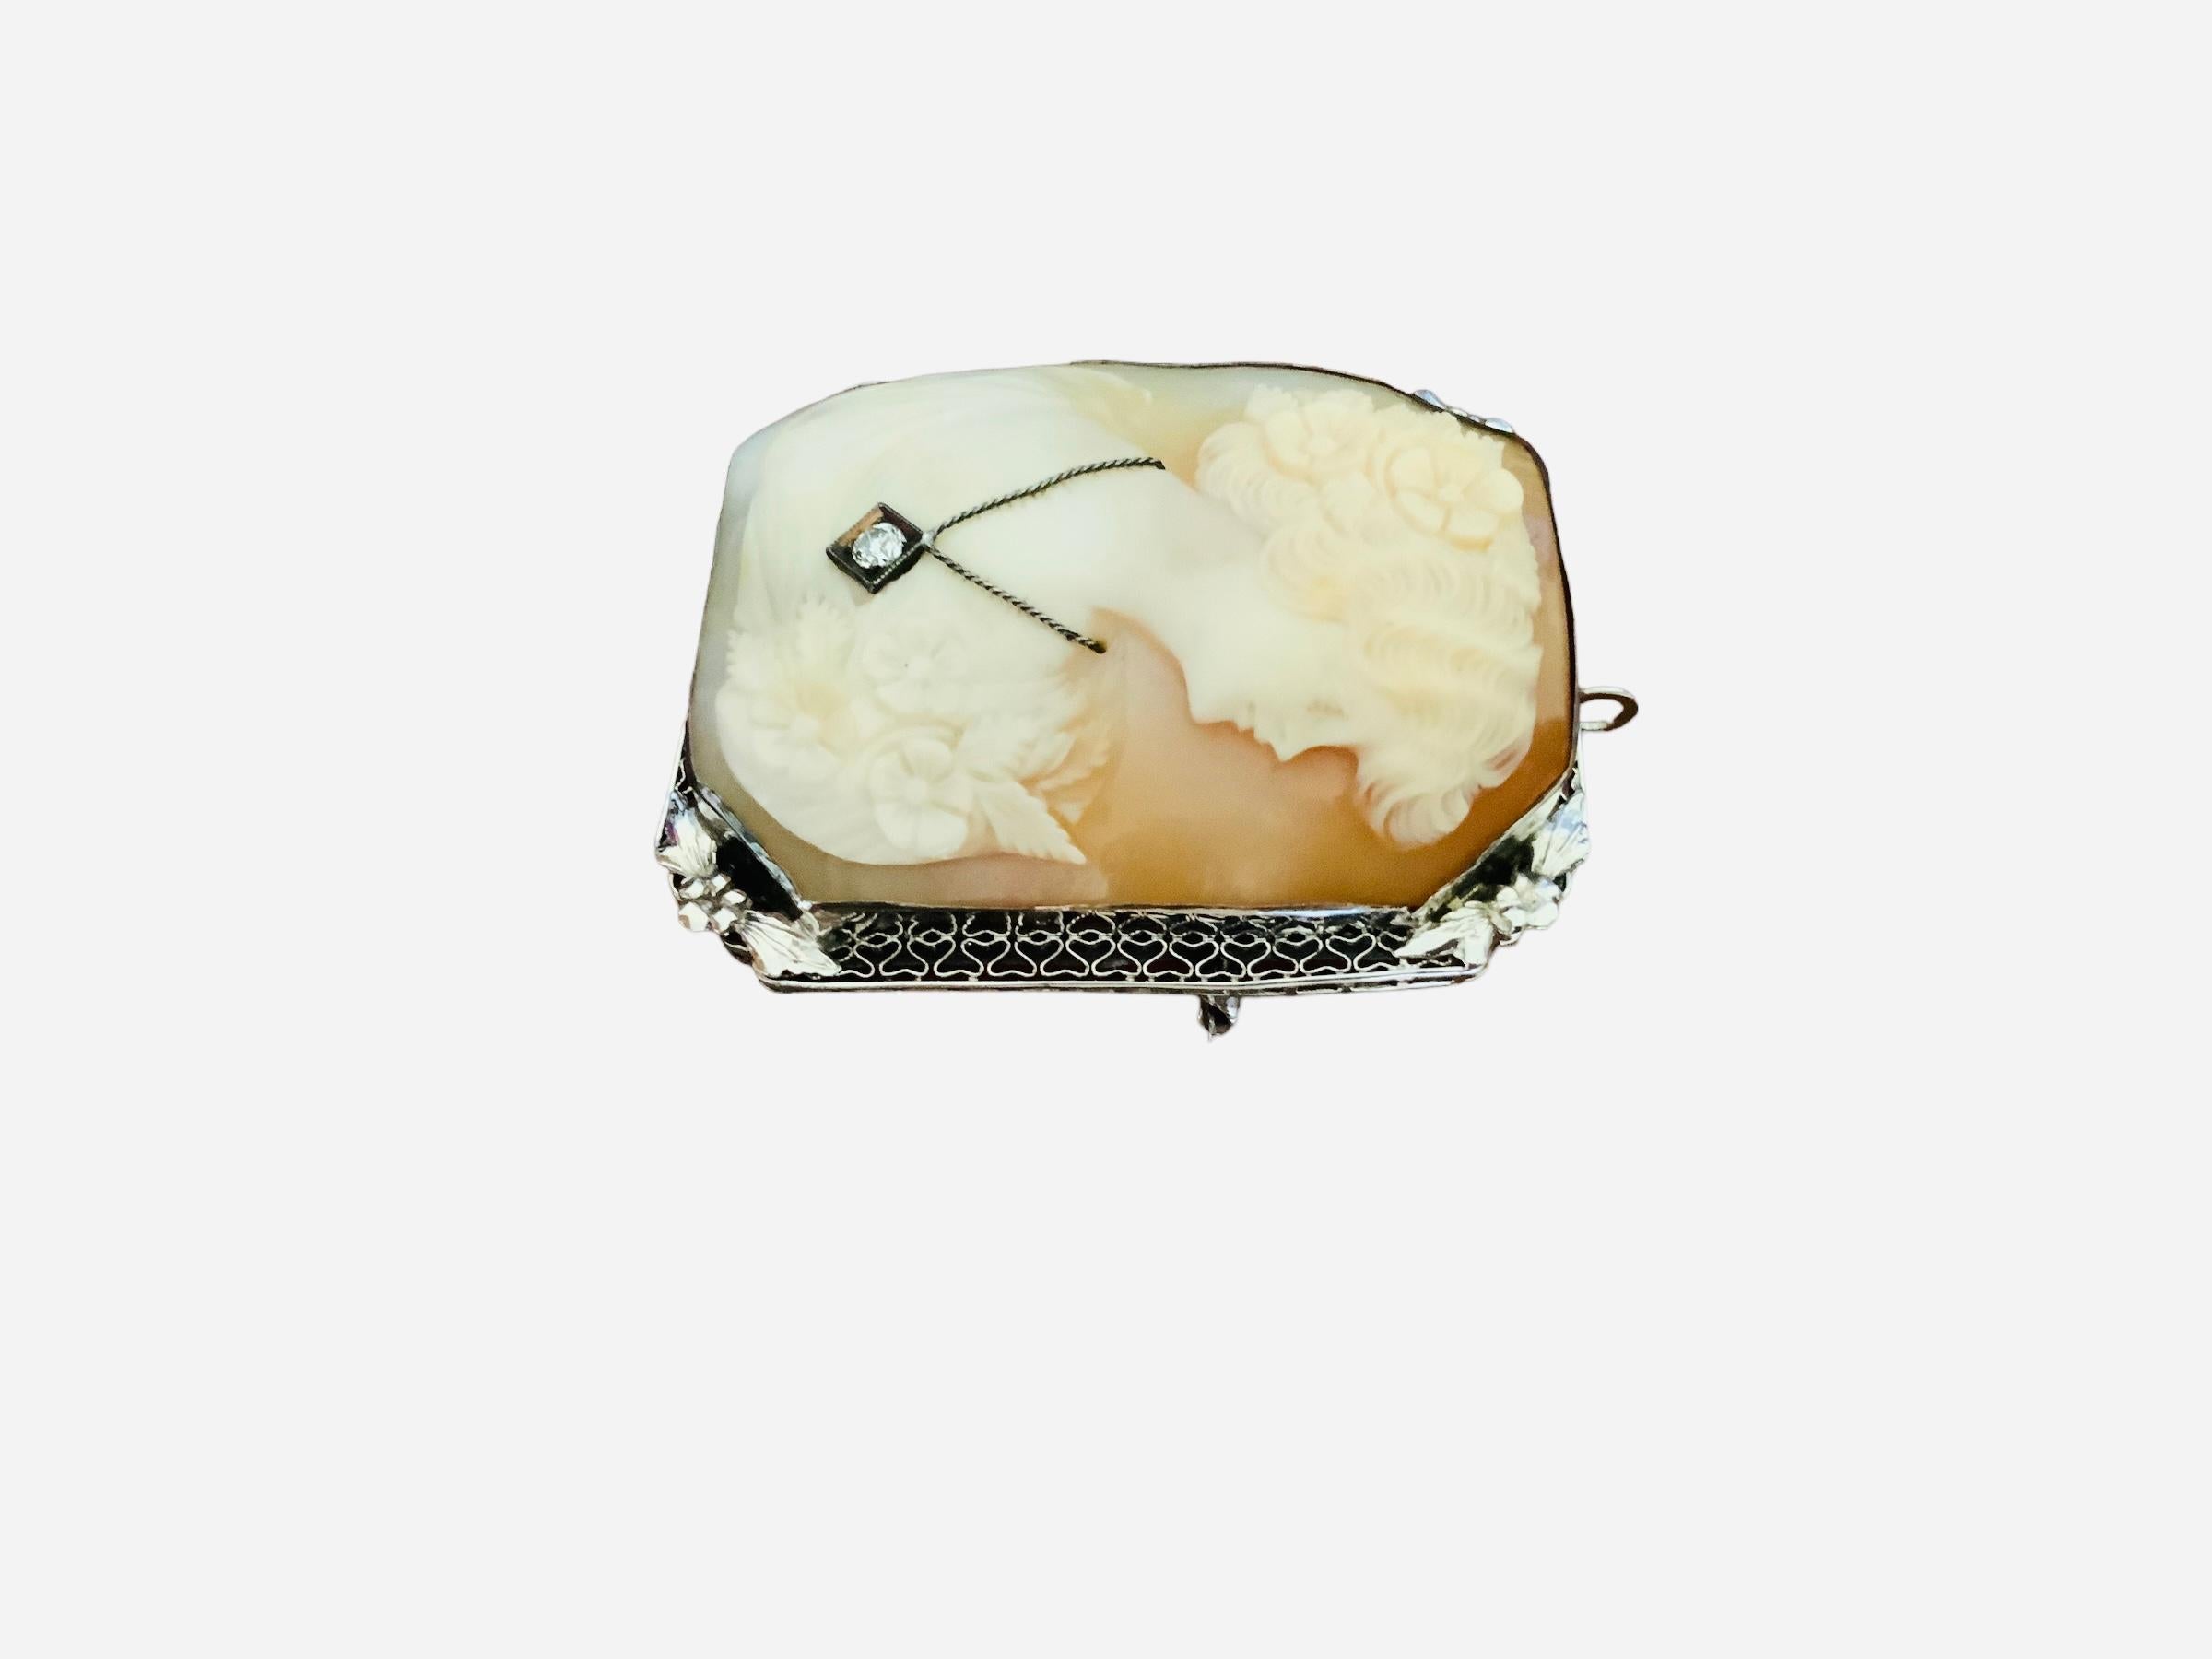 This is a 14K white gold Cameo brooch/pendant. It depicts an octagonal shaped orange shell cameo with a relief of a woman bust. The woman has a wavy hair adorned with pansy flowers. Her dress is also decorated by the same flowers. Her neck is